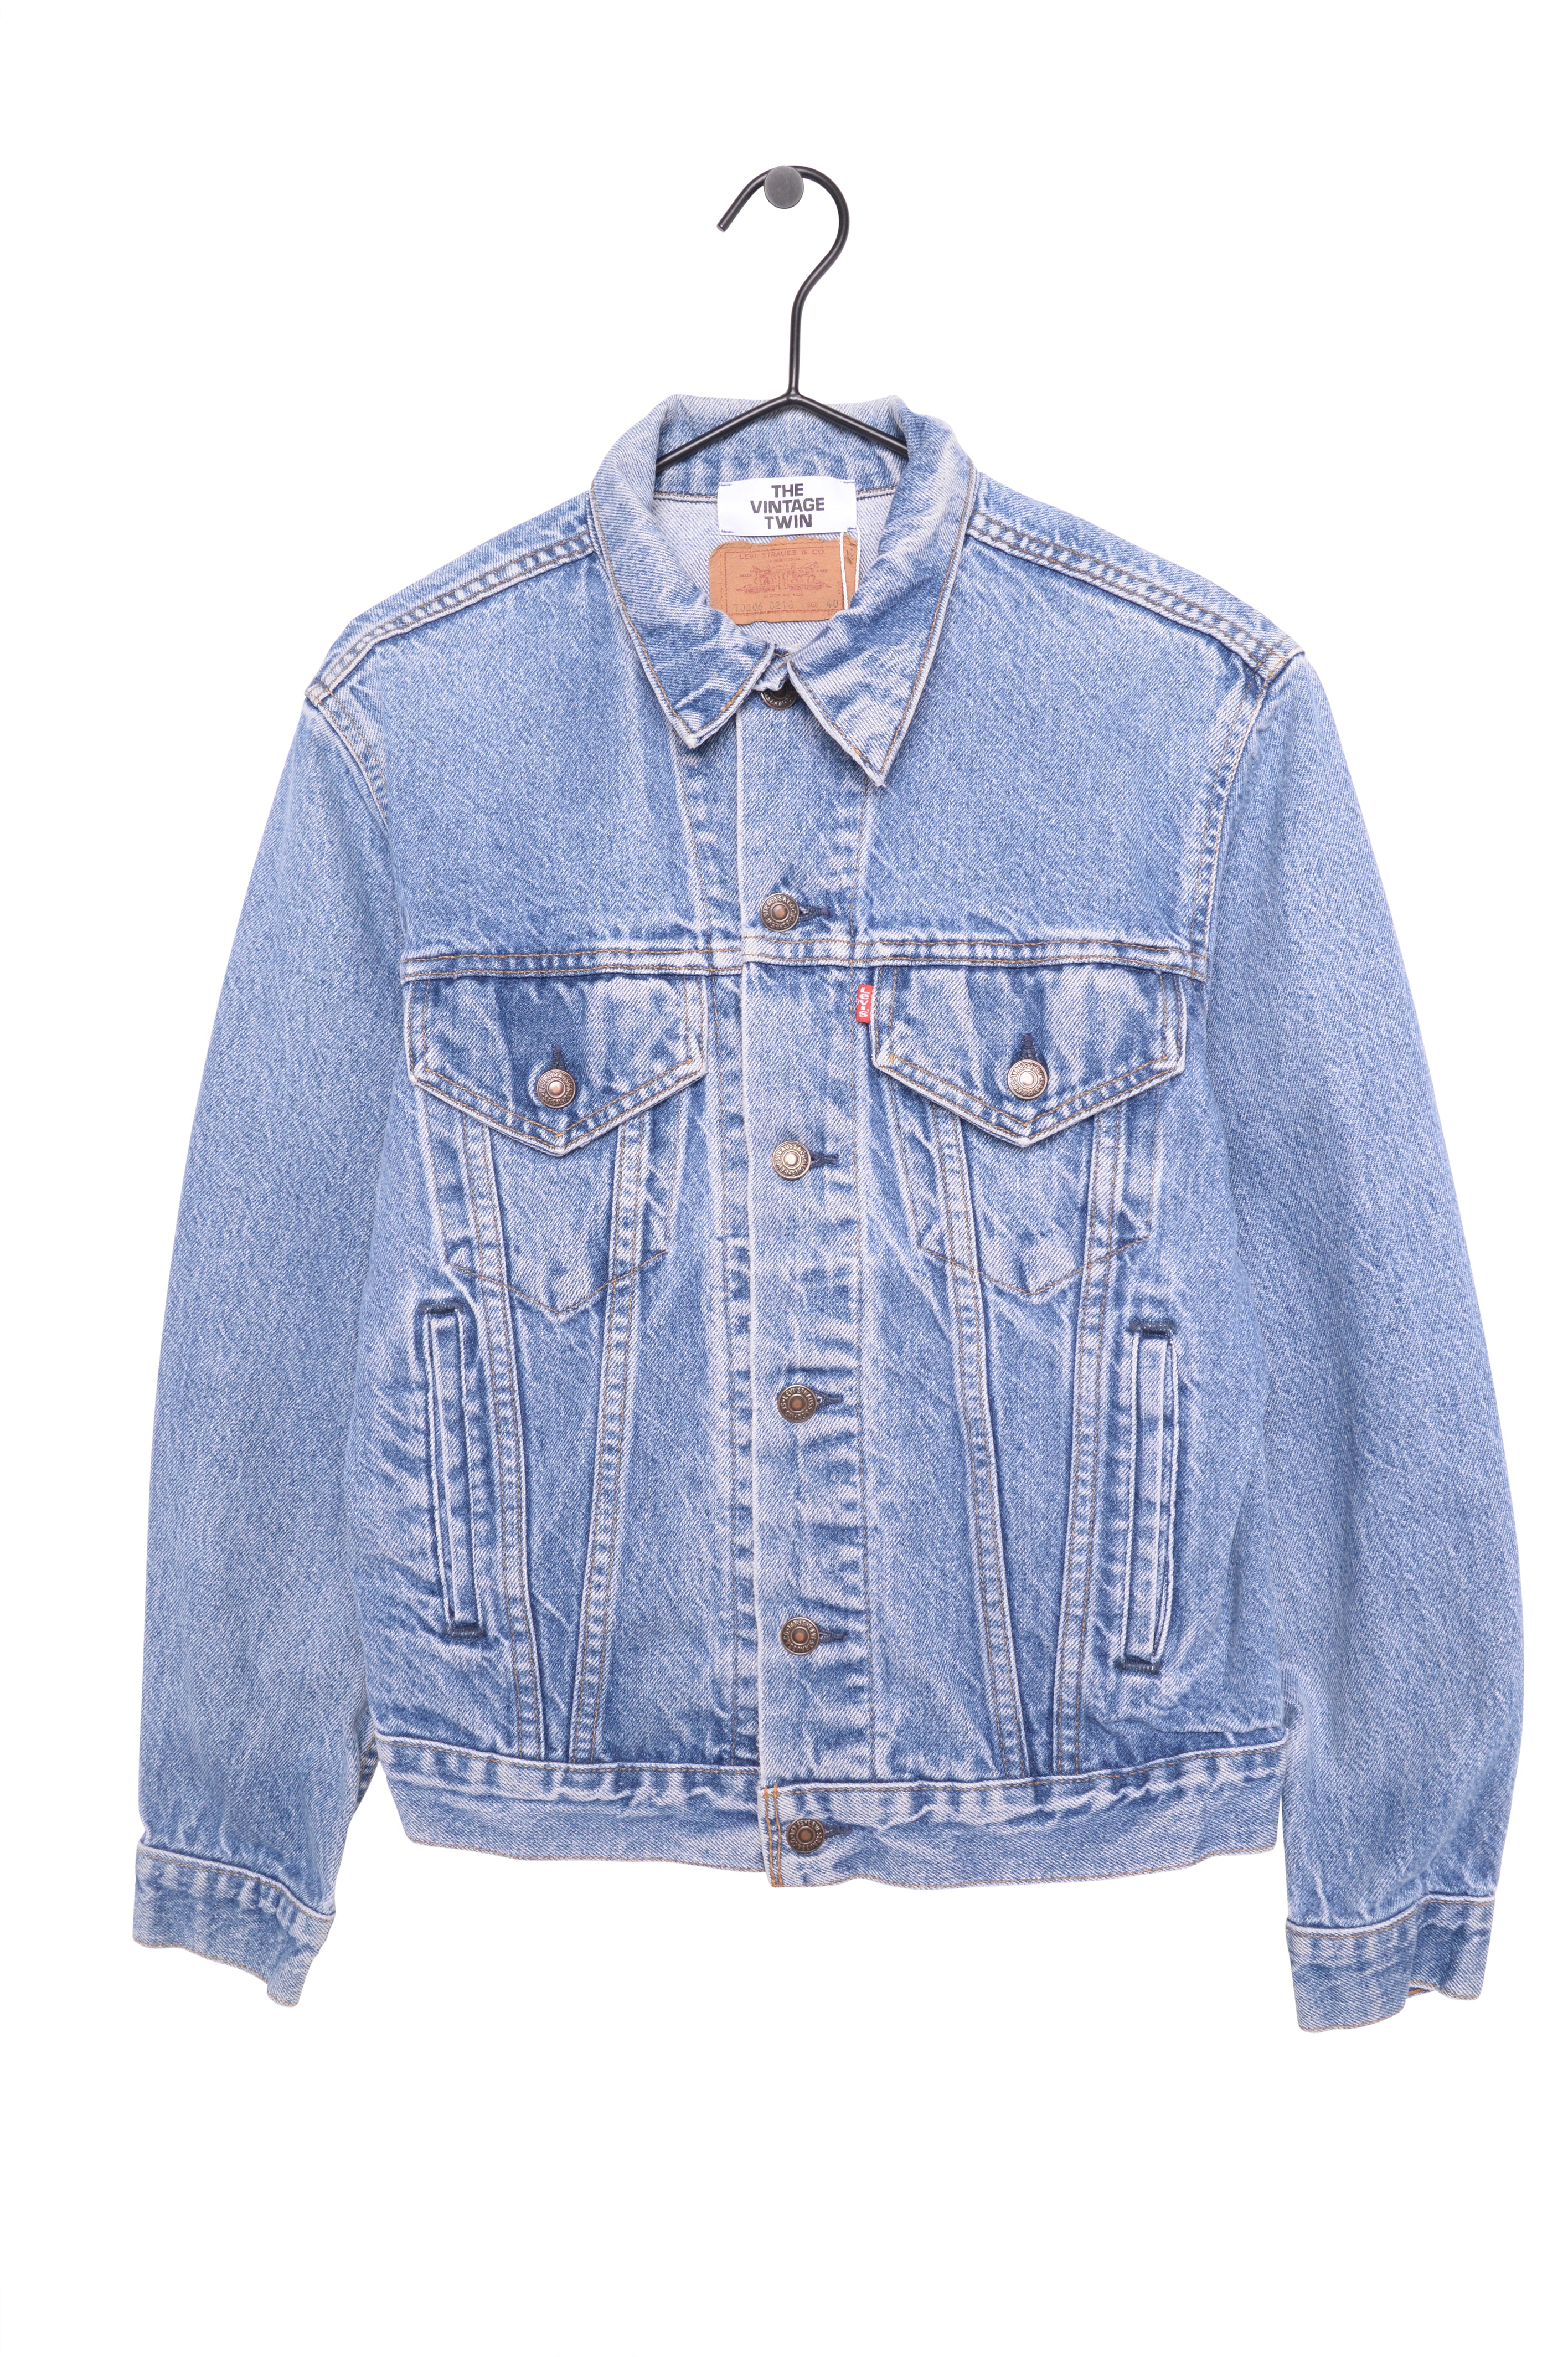 1980s Perfect Fade Levi's Denim Jacket USA – The Vintage Twin